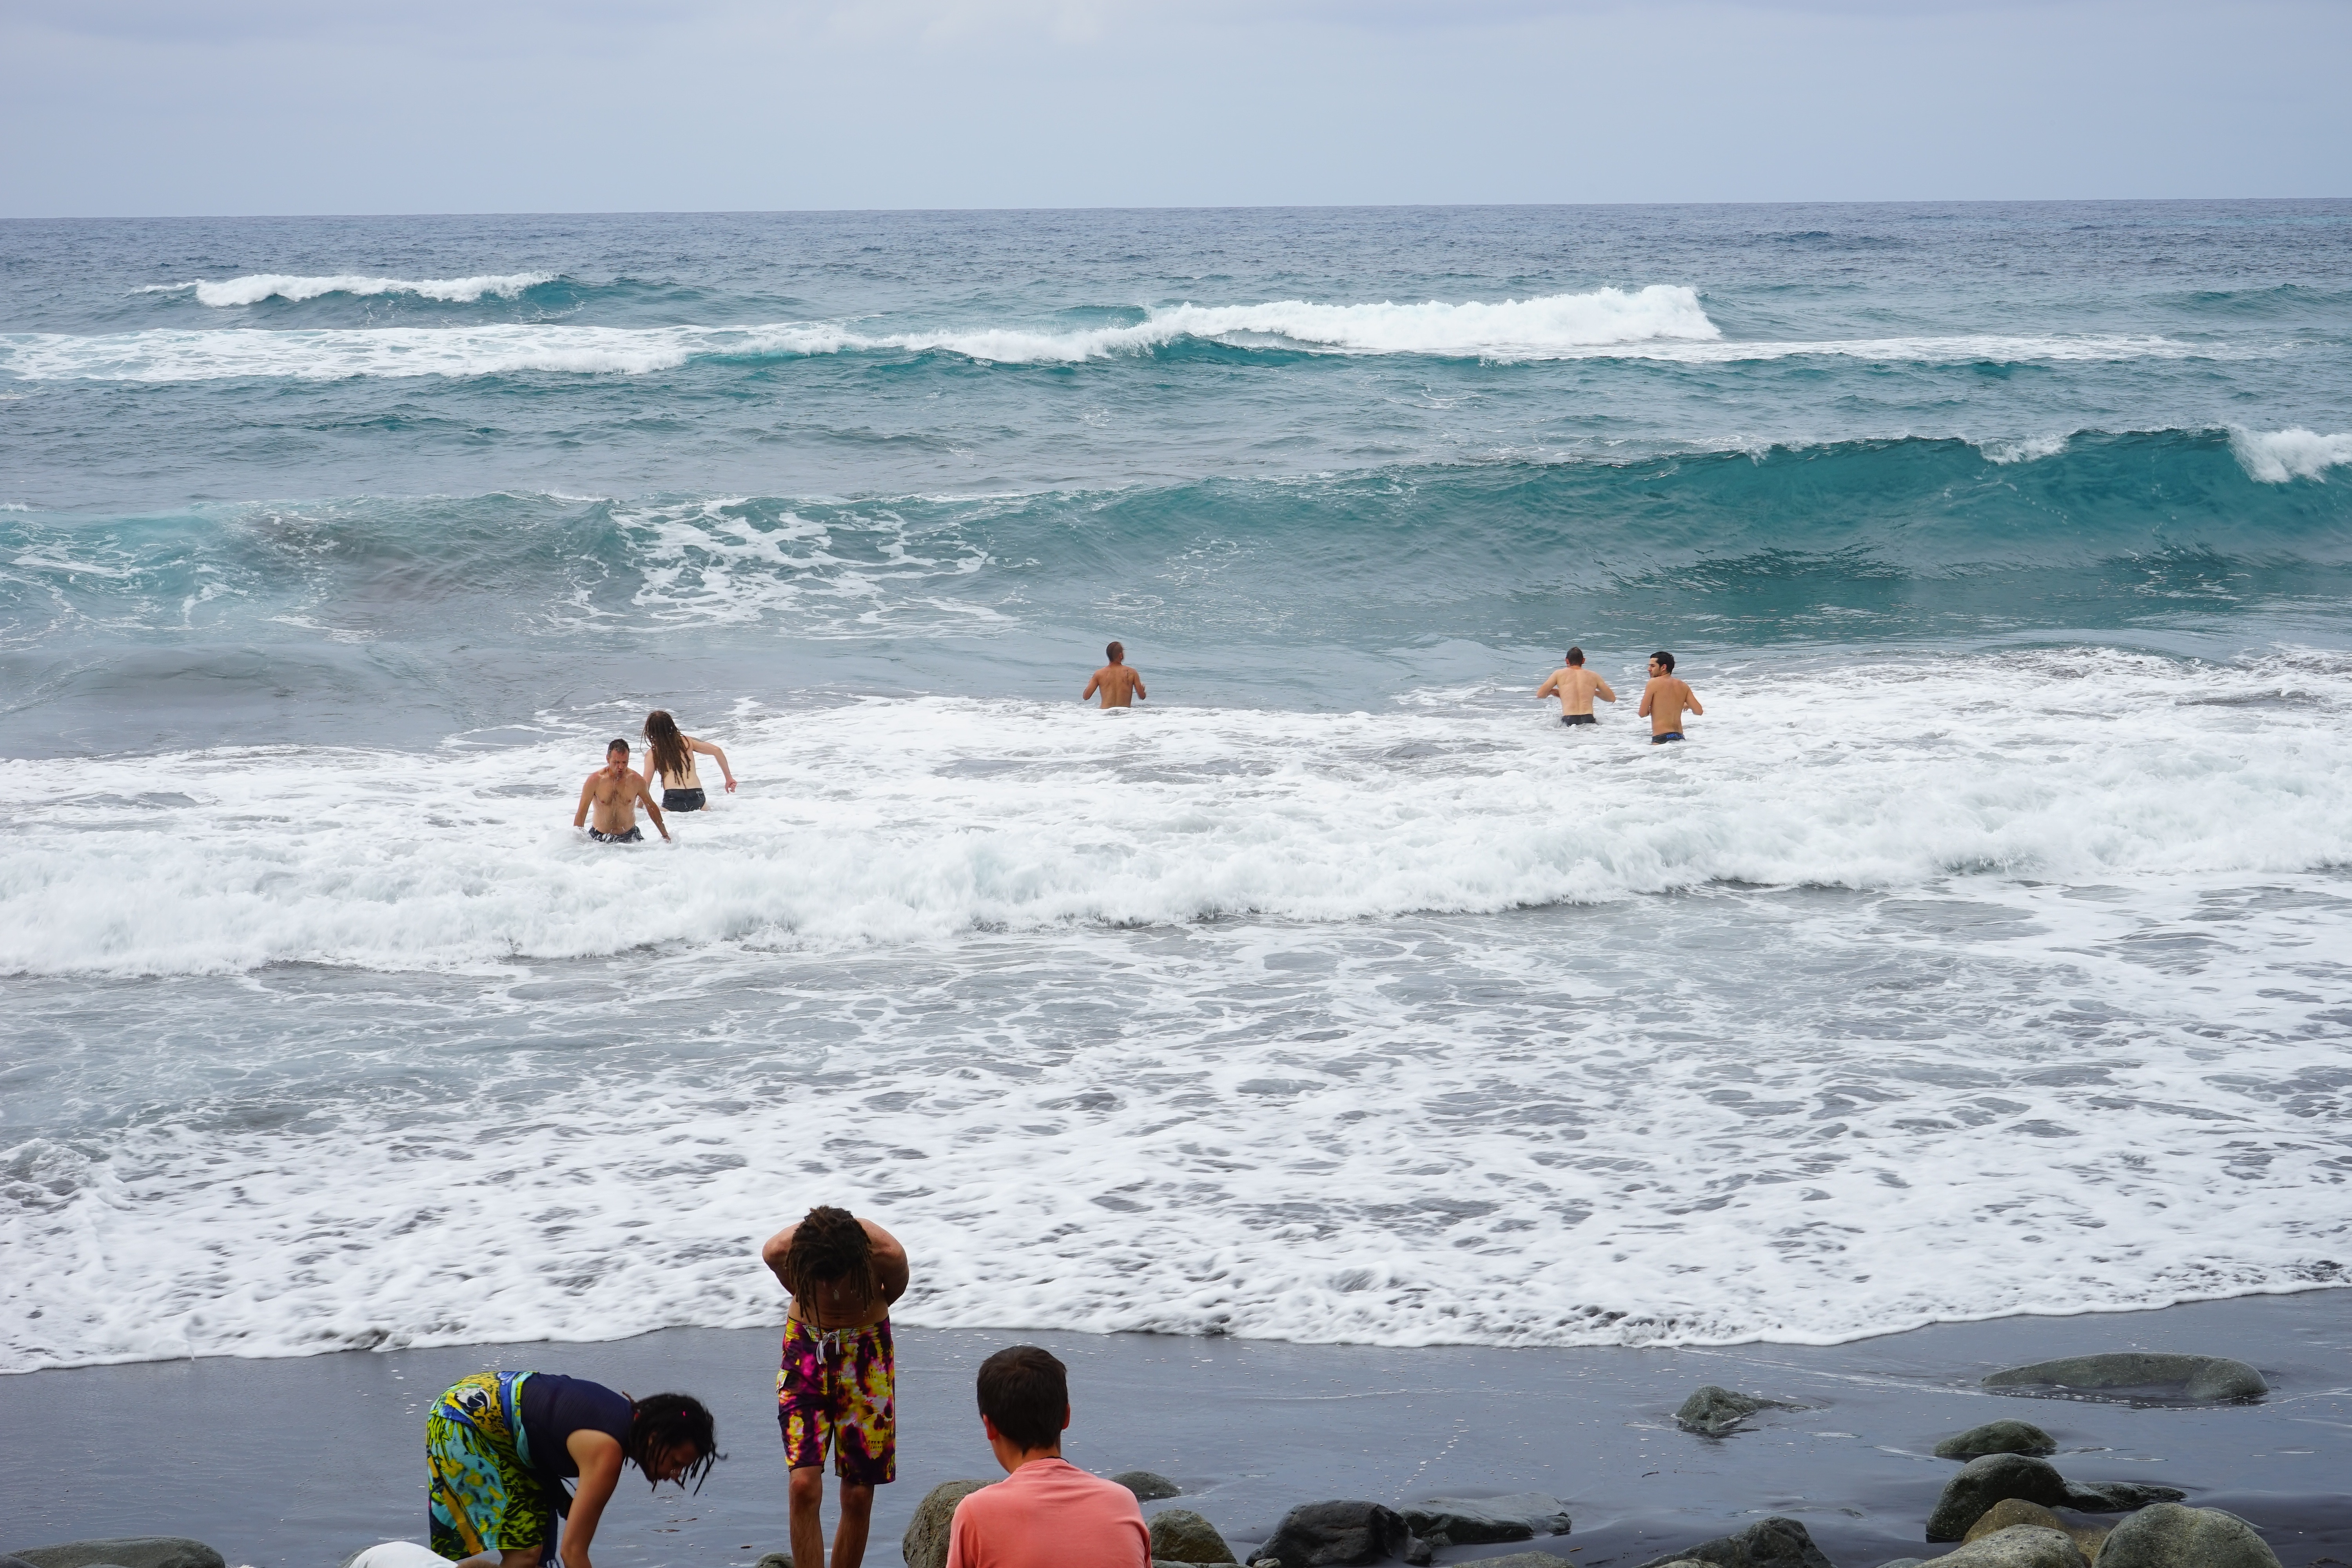 5 persons swimming at beach near 3 persons at gray seashore during daytime